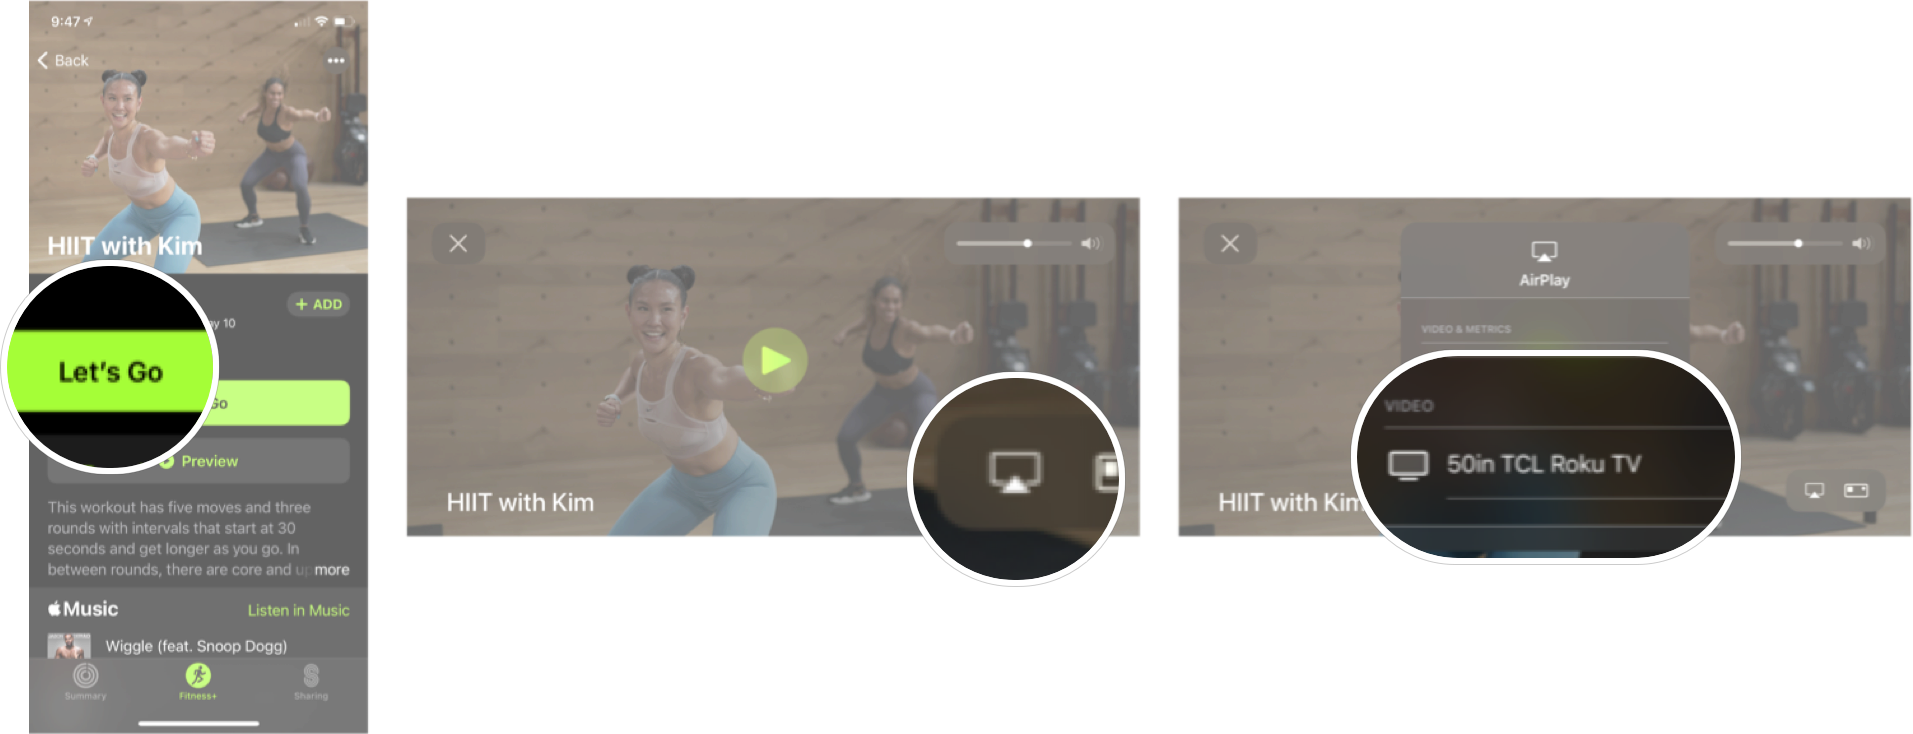 How To Airplay Fitness Plus Workout to your TV: Tap Let's Go, tap the AirPLay button, and then tap the device you want to AirPlay. 